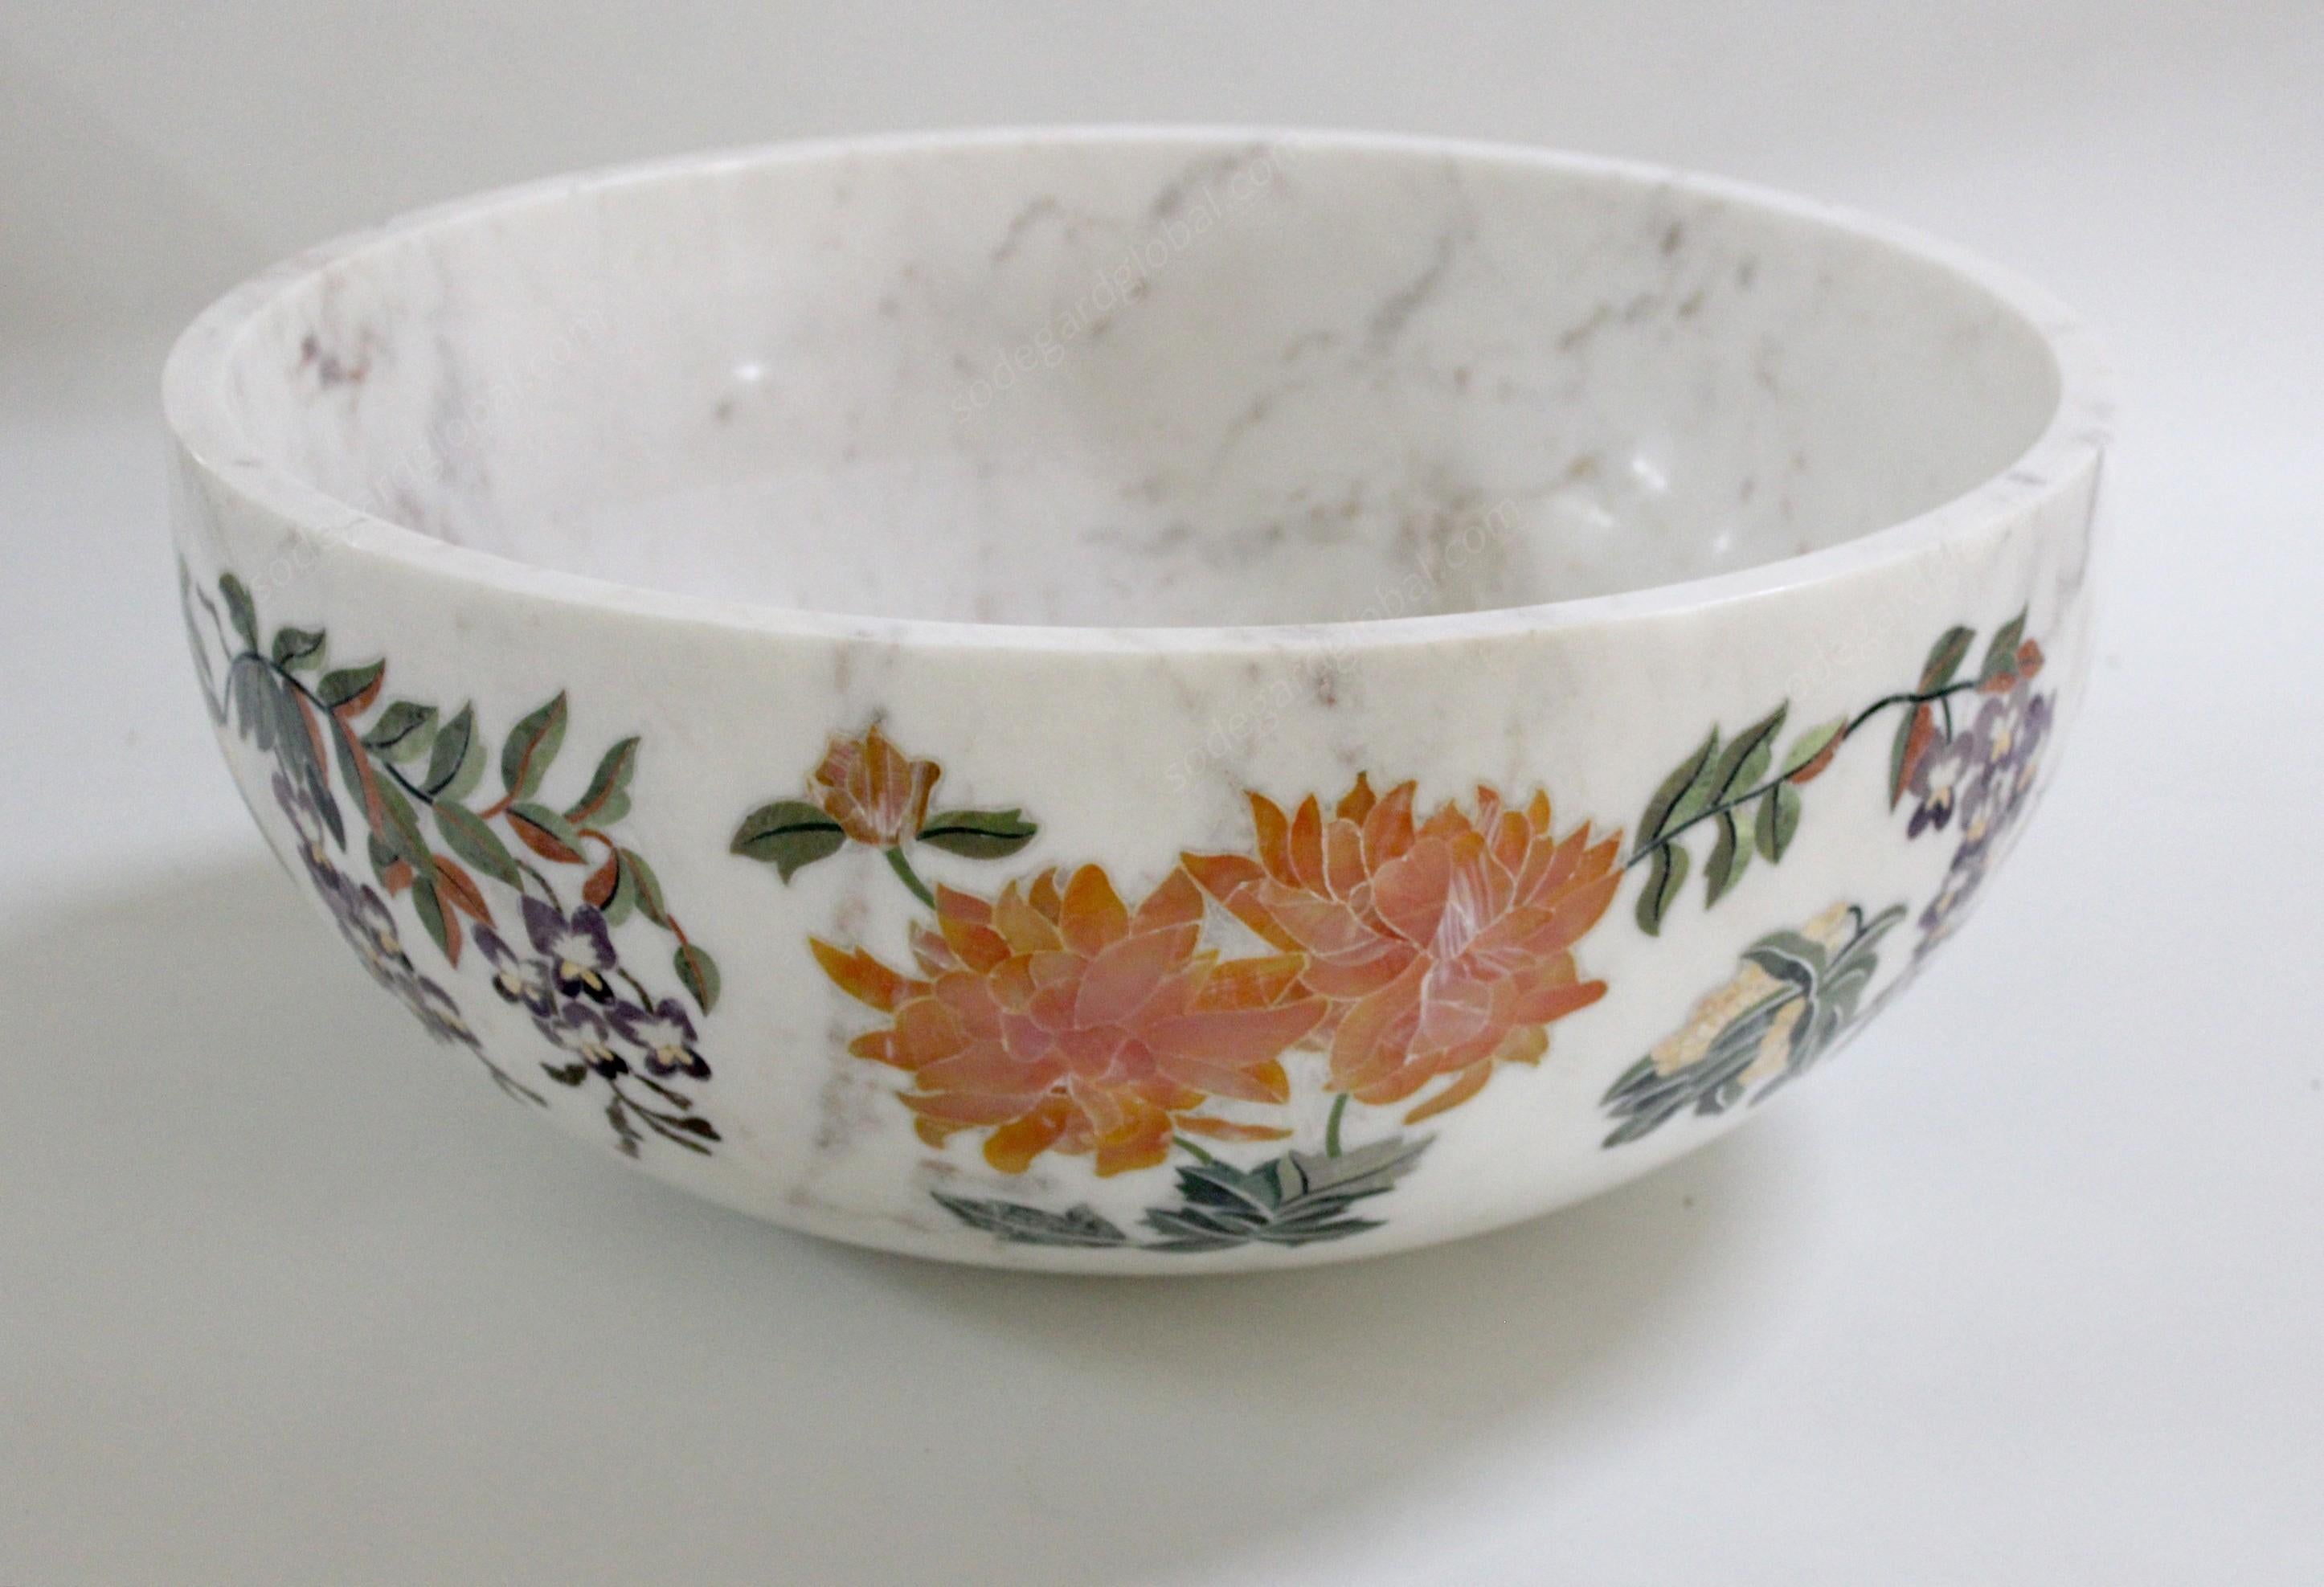 Handmade Ornamenti Bowl Inlay in White Marble by Stephanie Odegard For Sale 7